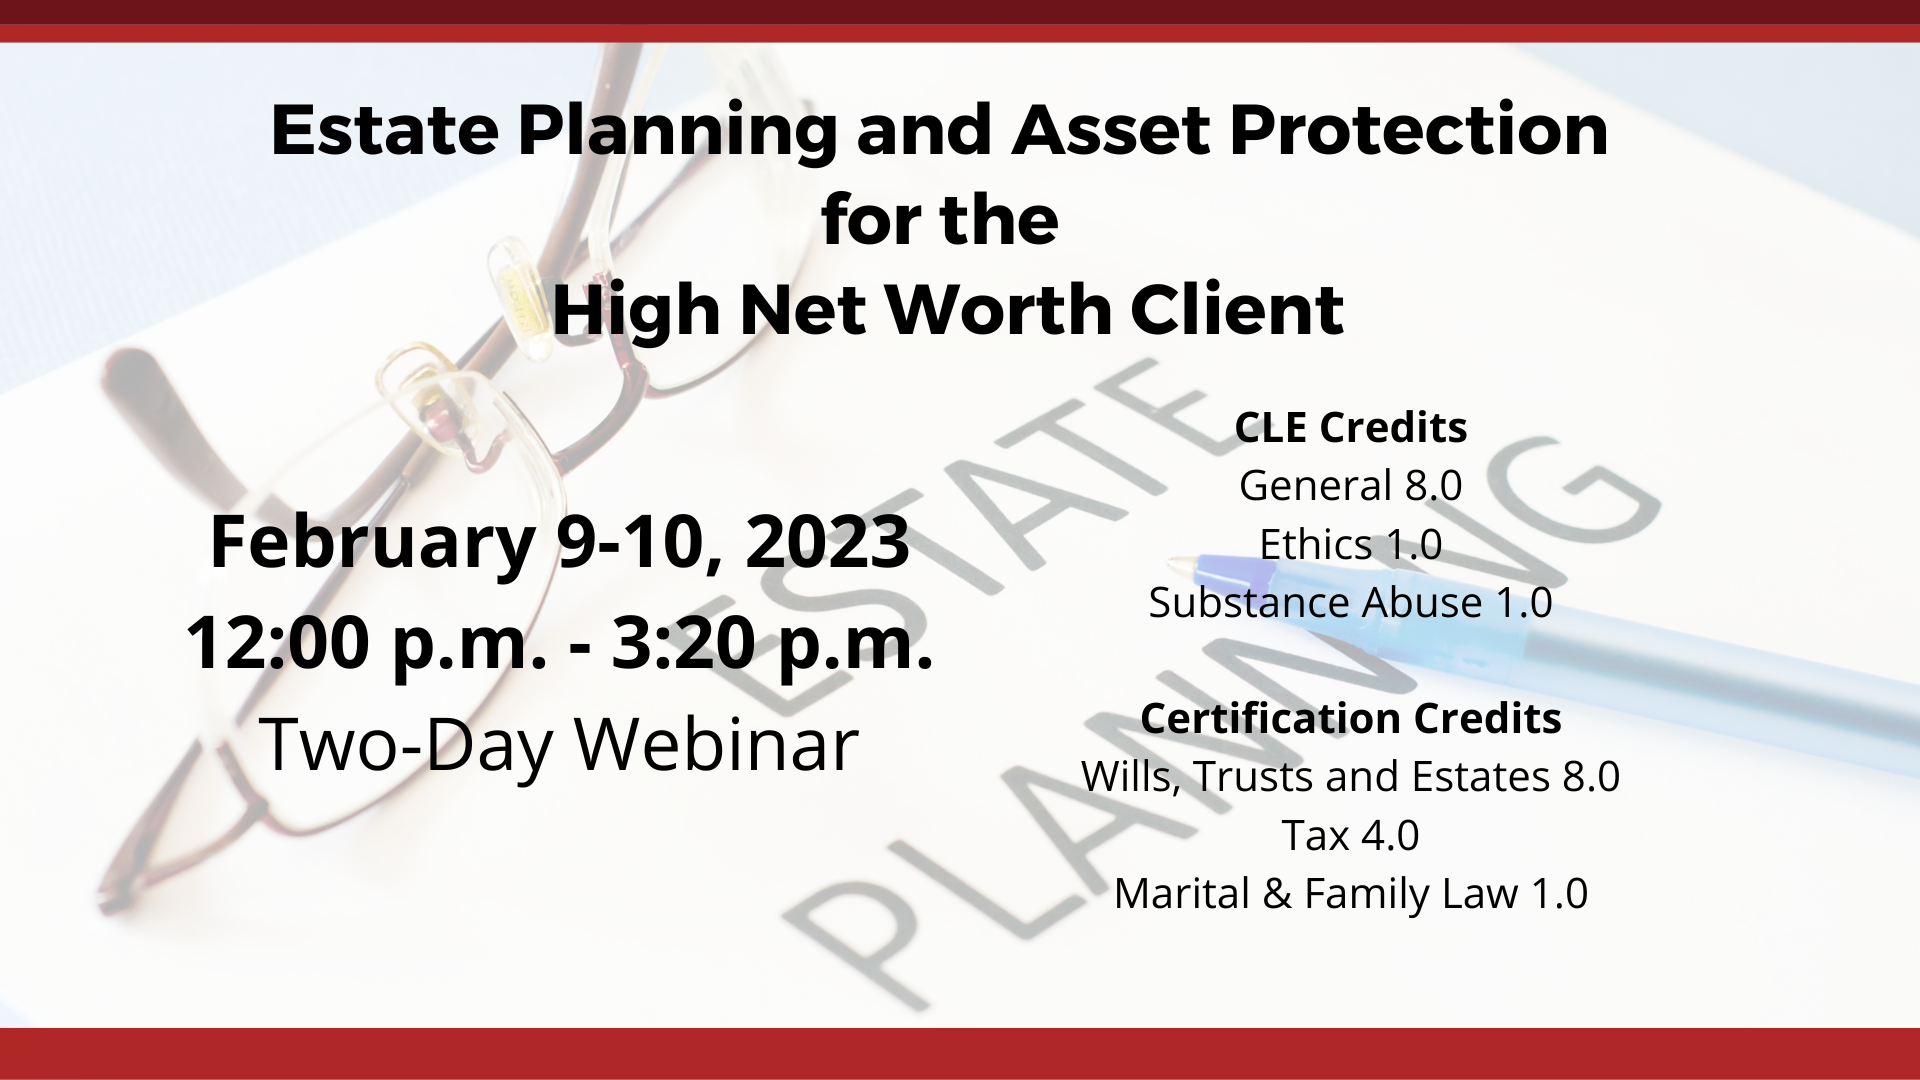 Estate Planning and Asset Protection for the High Net Worth Client